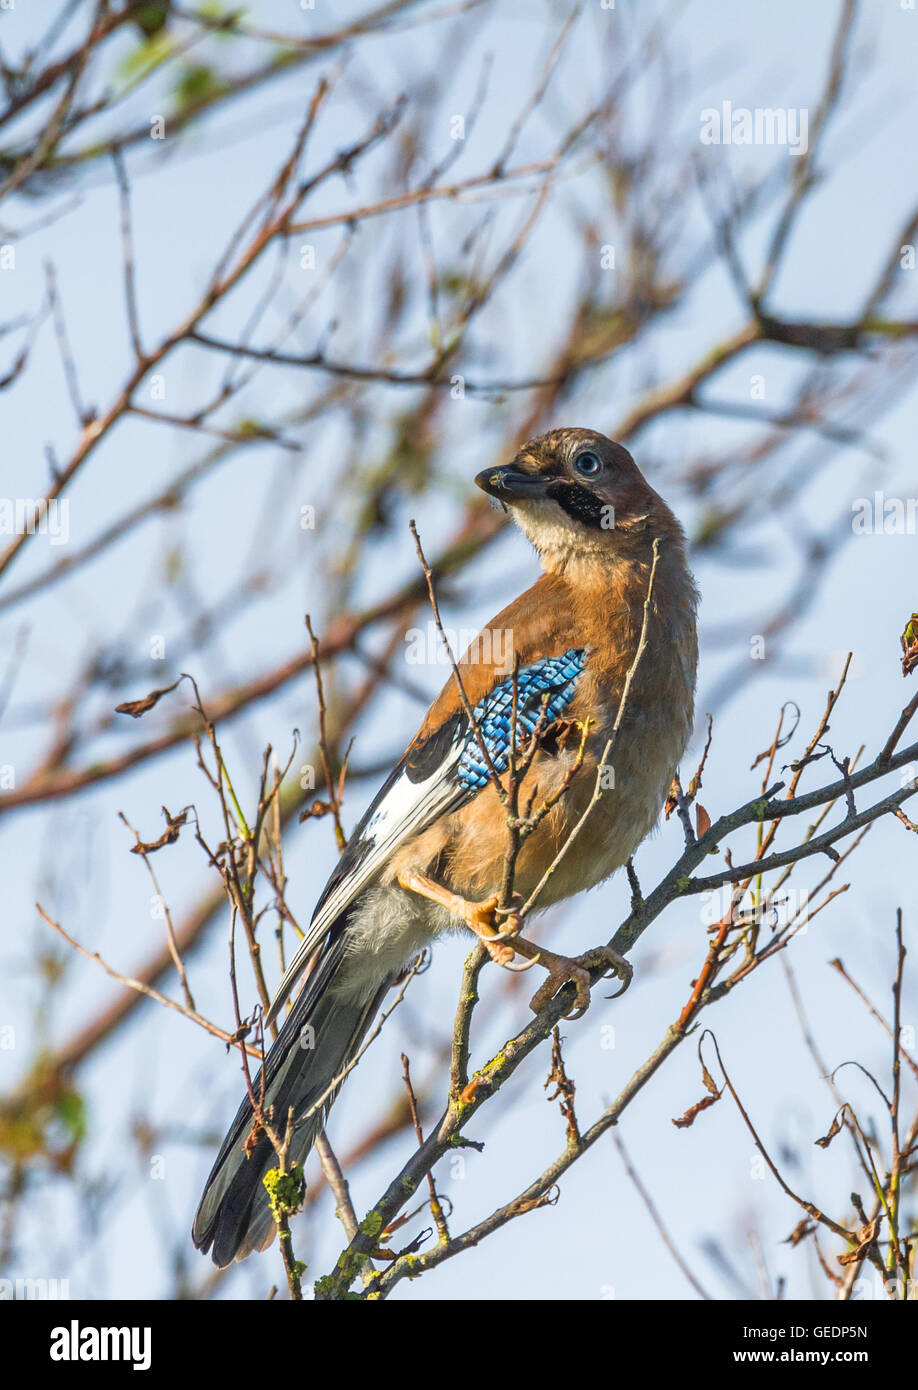 Juvenile Jay perched on a branch eating a damselfly. Stock Photo